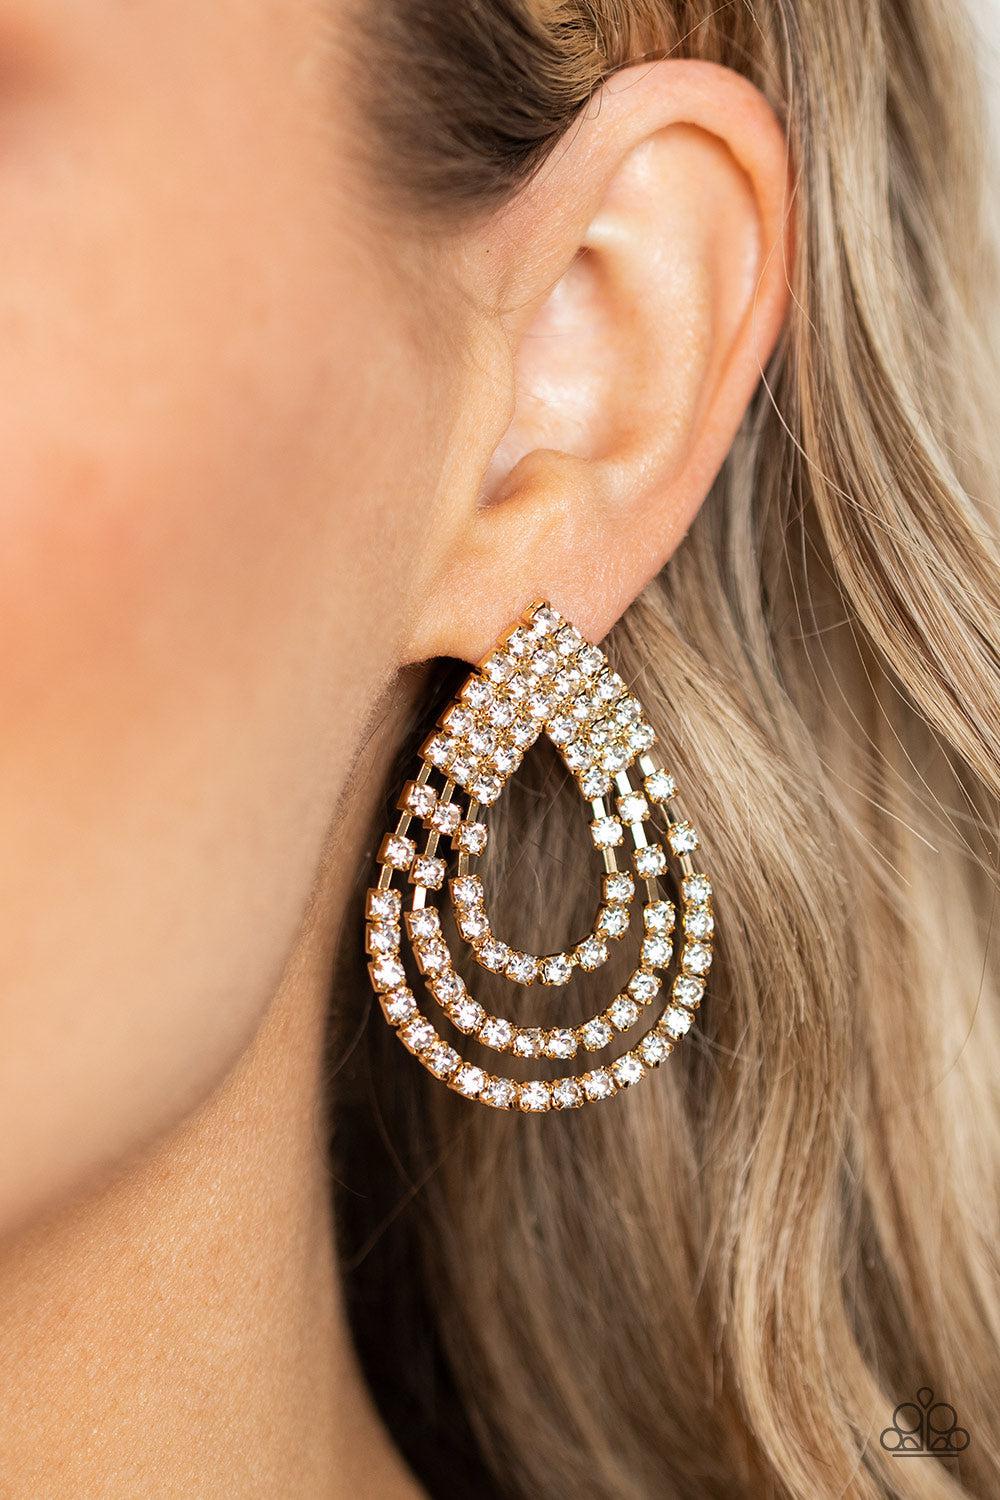 Take a POWER Stance Gold & White Rhinestone Earrings - Paparazzi Accessories- lightbox - CarasShop.com - $5 Jewelry by Cara Jewels